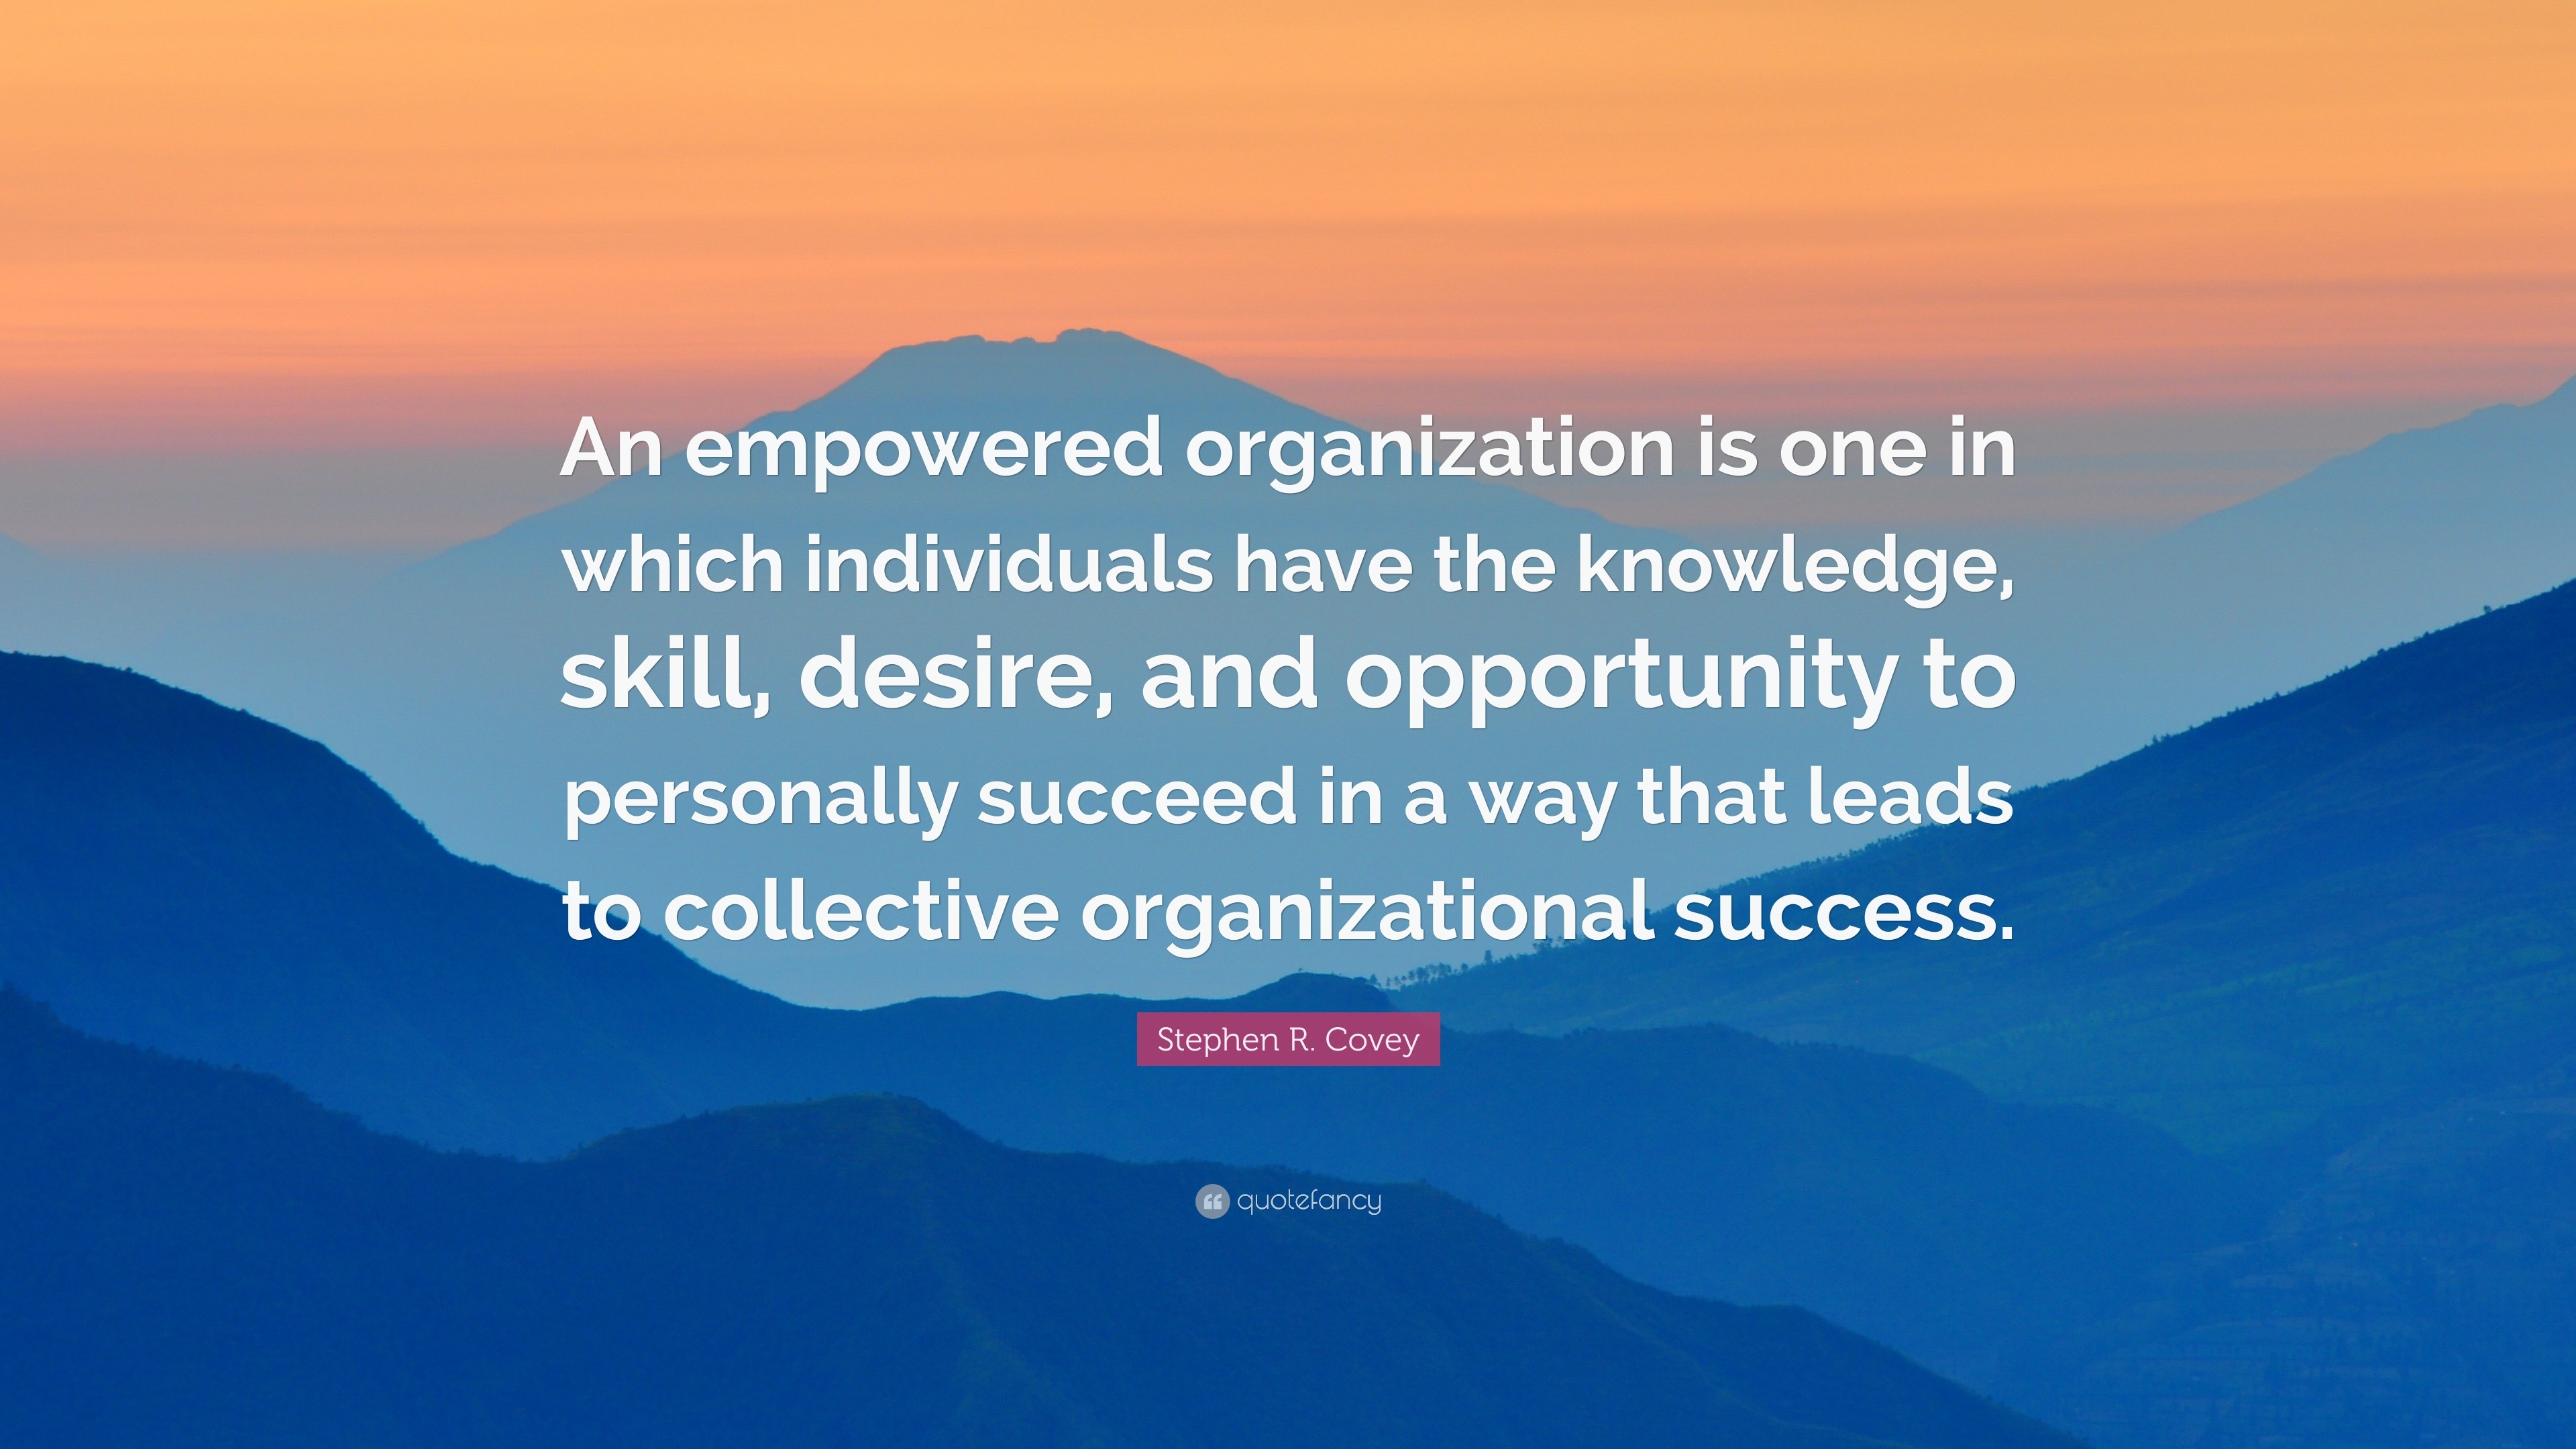 Stephen R. Covey Quote: “An empowered organization is one in which